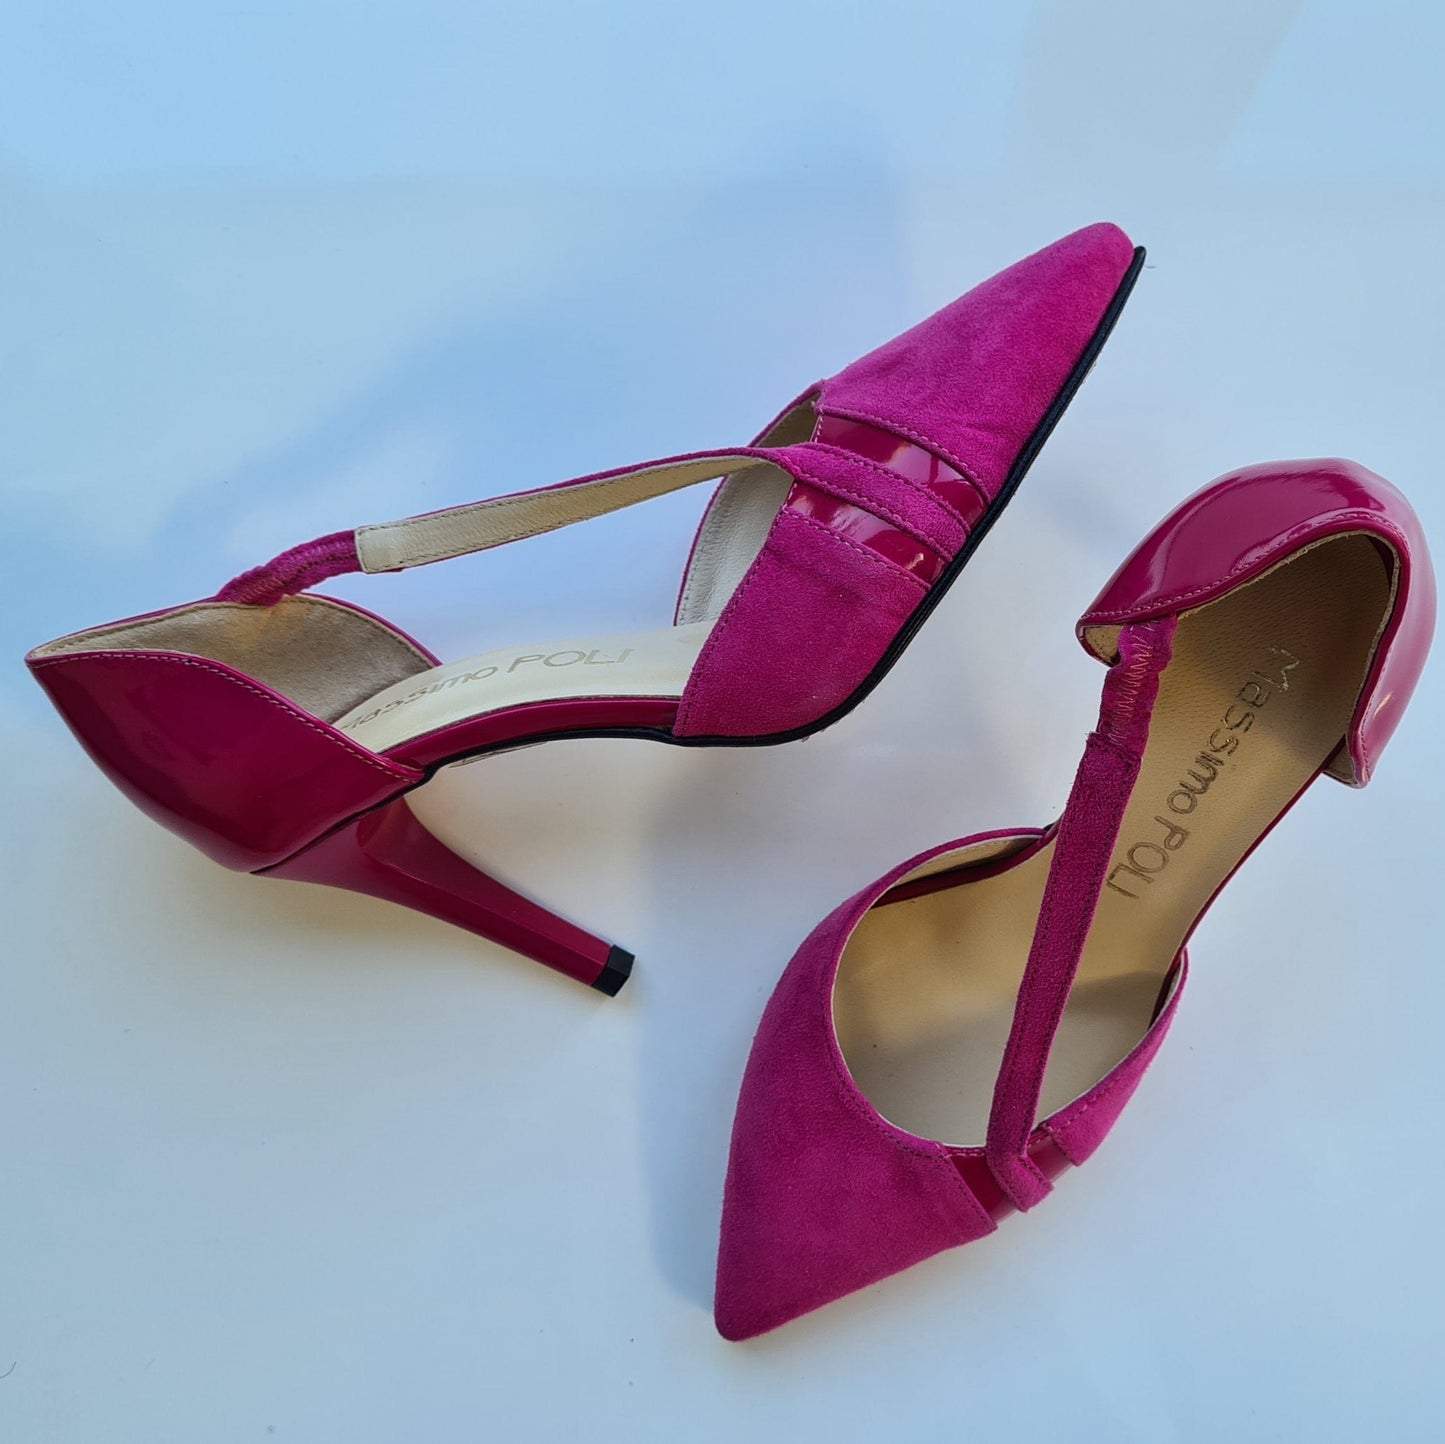 Small size court heels in pink suede leather